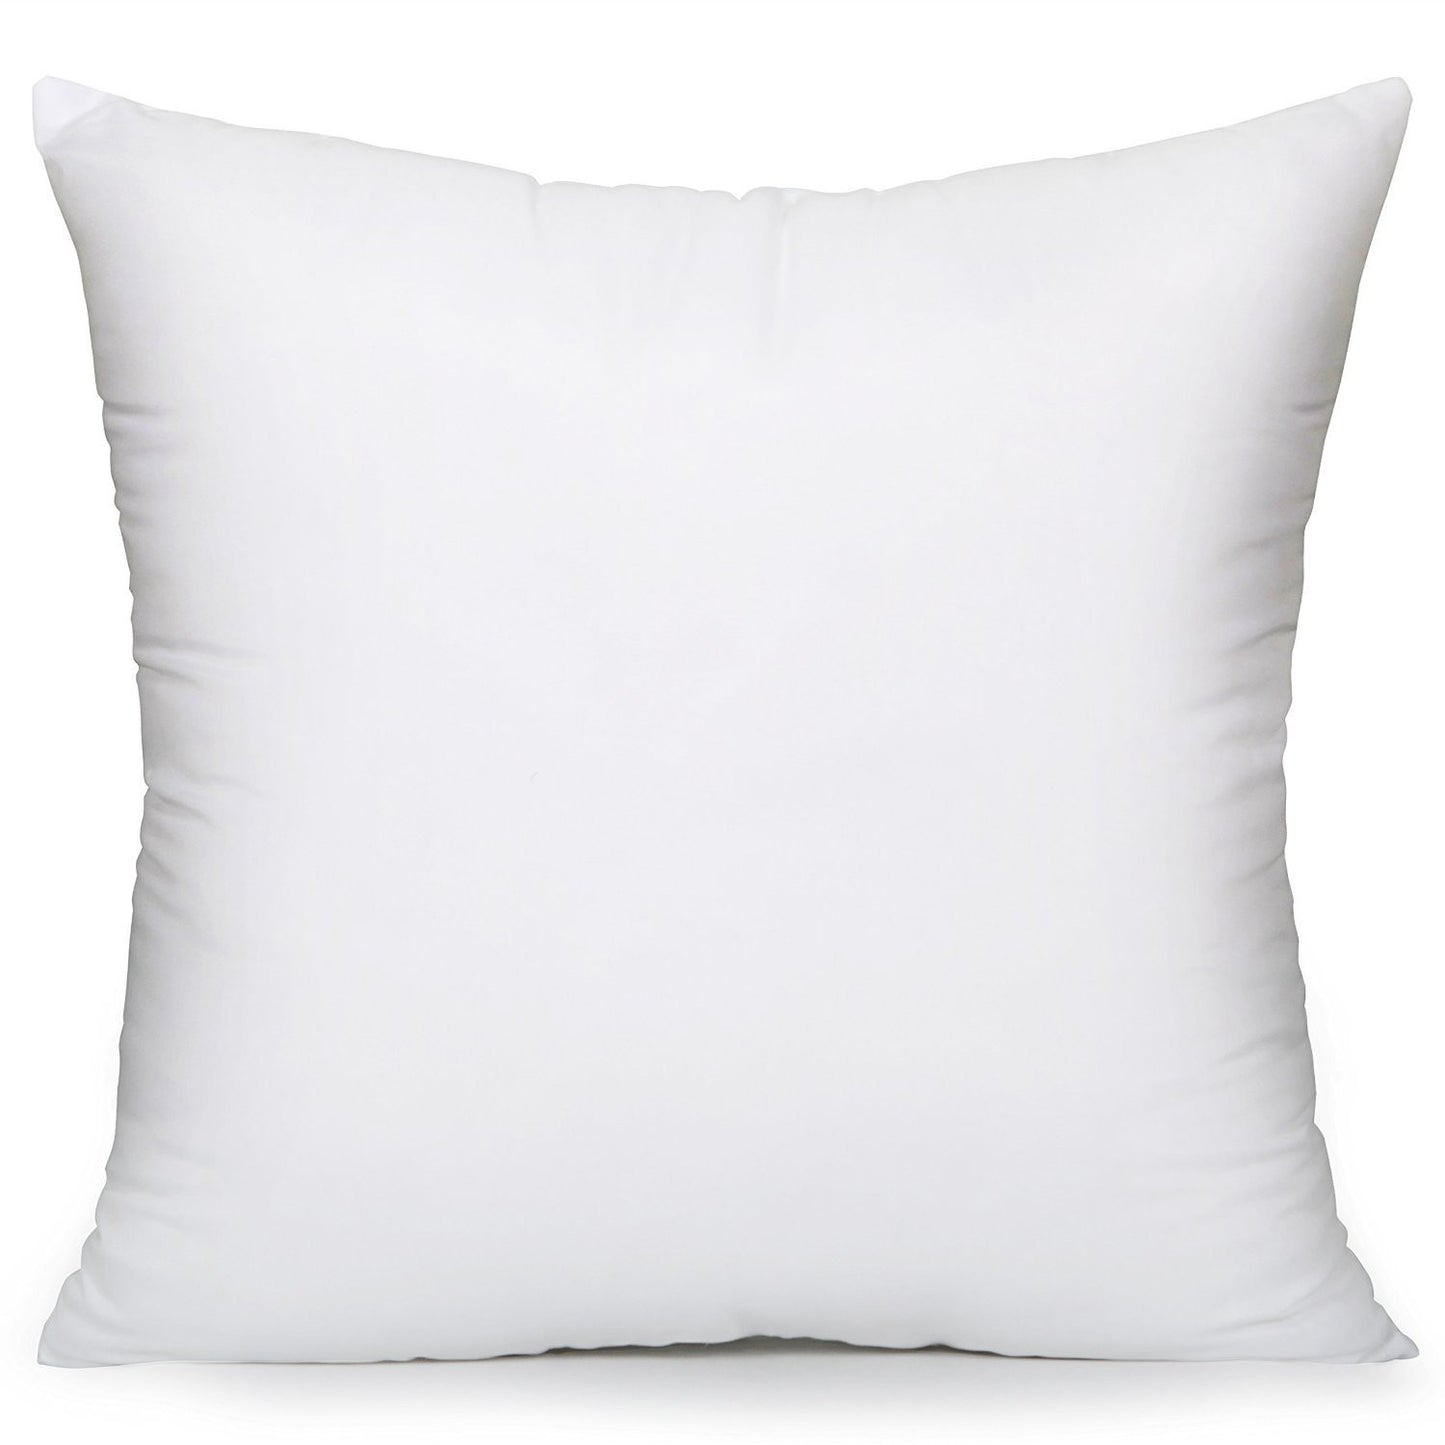 MoonRest - New Pillow Insert Form Hypo-allergenic - Made in USA